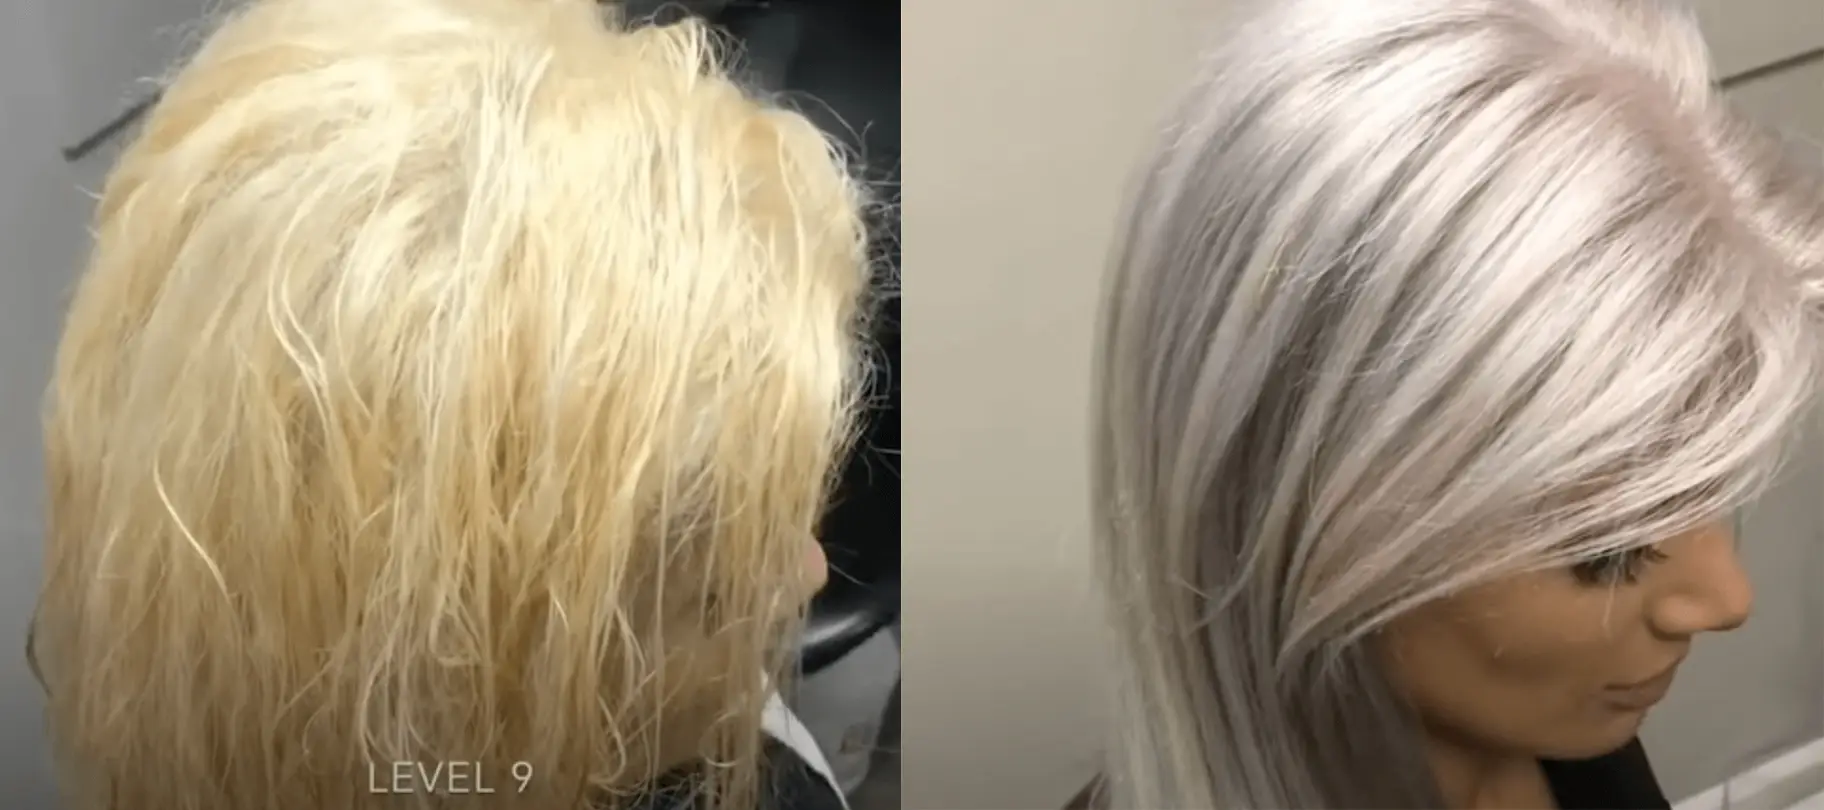 7. Toner for Blonde Hair: What You Need to Know Before Buying - wide 2